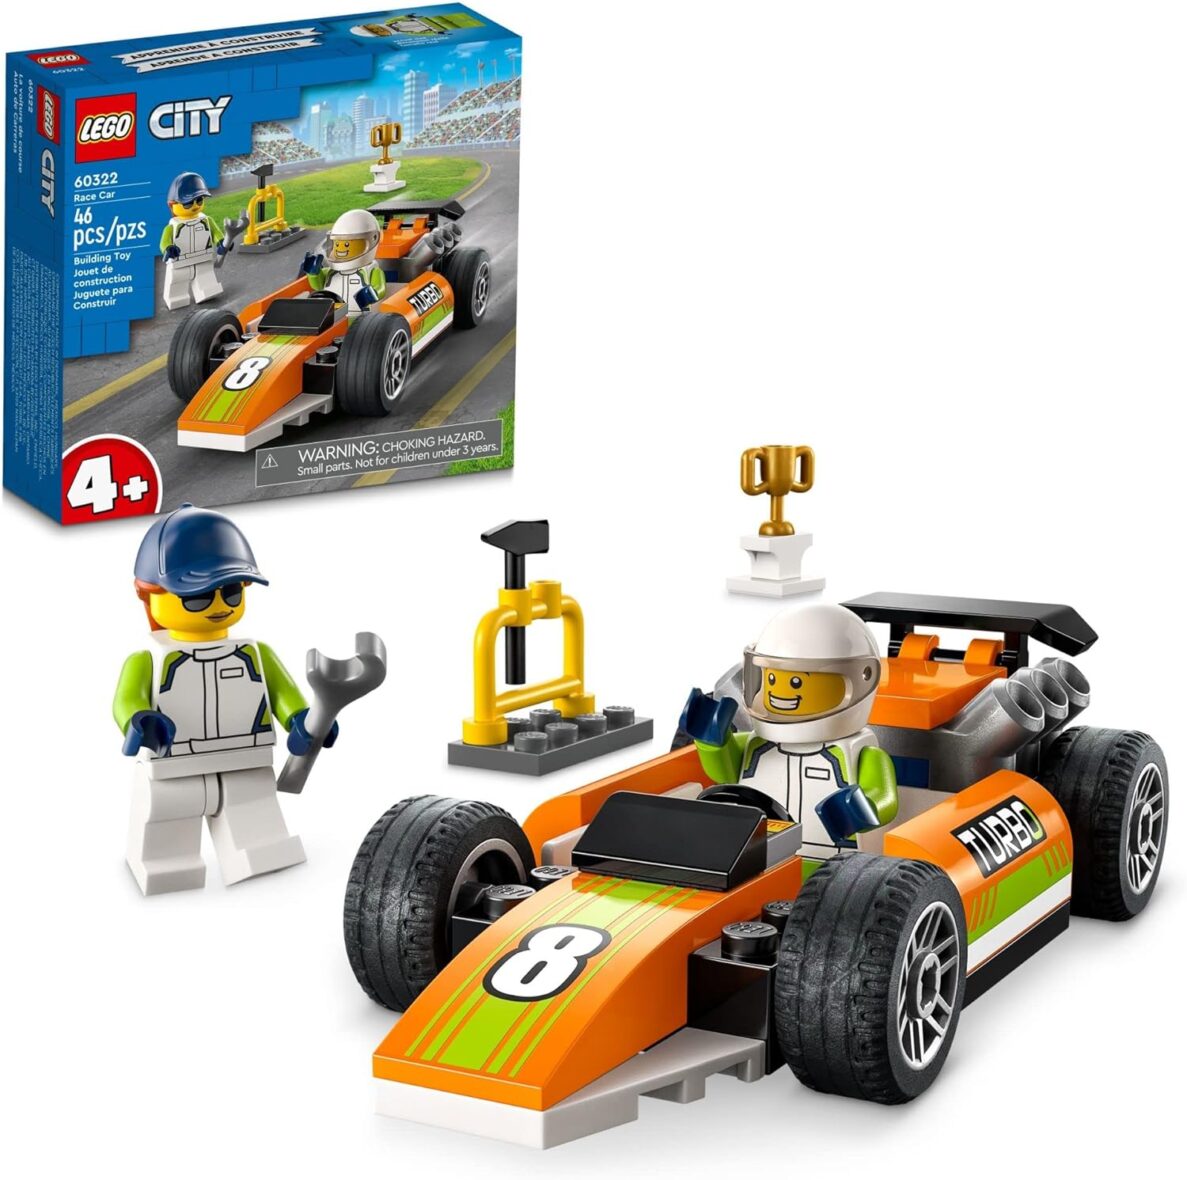 LEGO City Great Vehicles Race Car, 60322 F1 Style Toy for Preschool Kids 4 Plus Years Old, with Mechanic and Racing Driver Minifigures